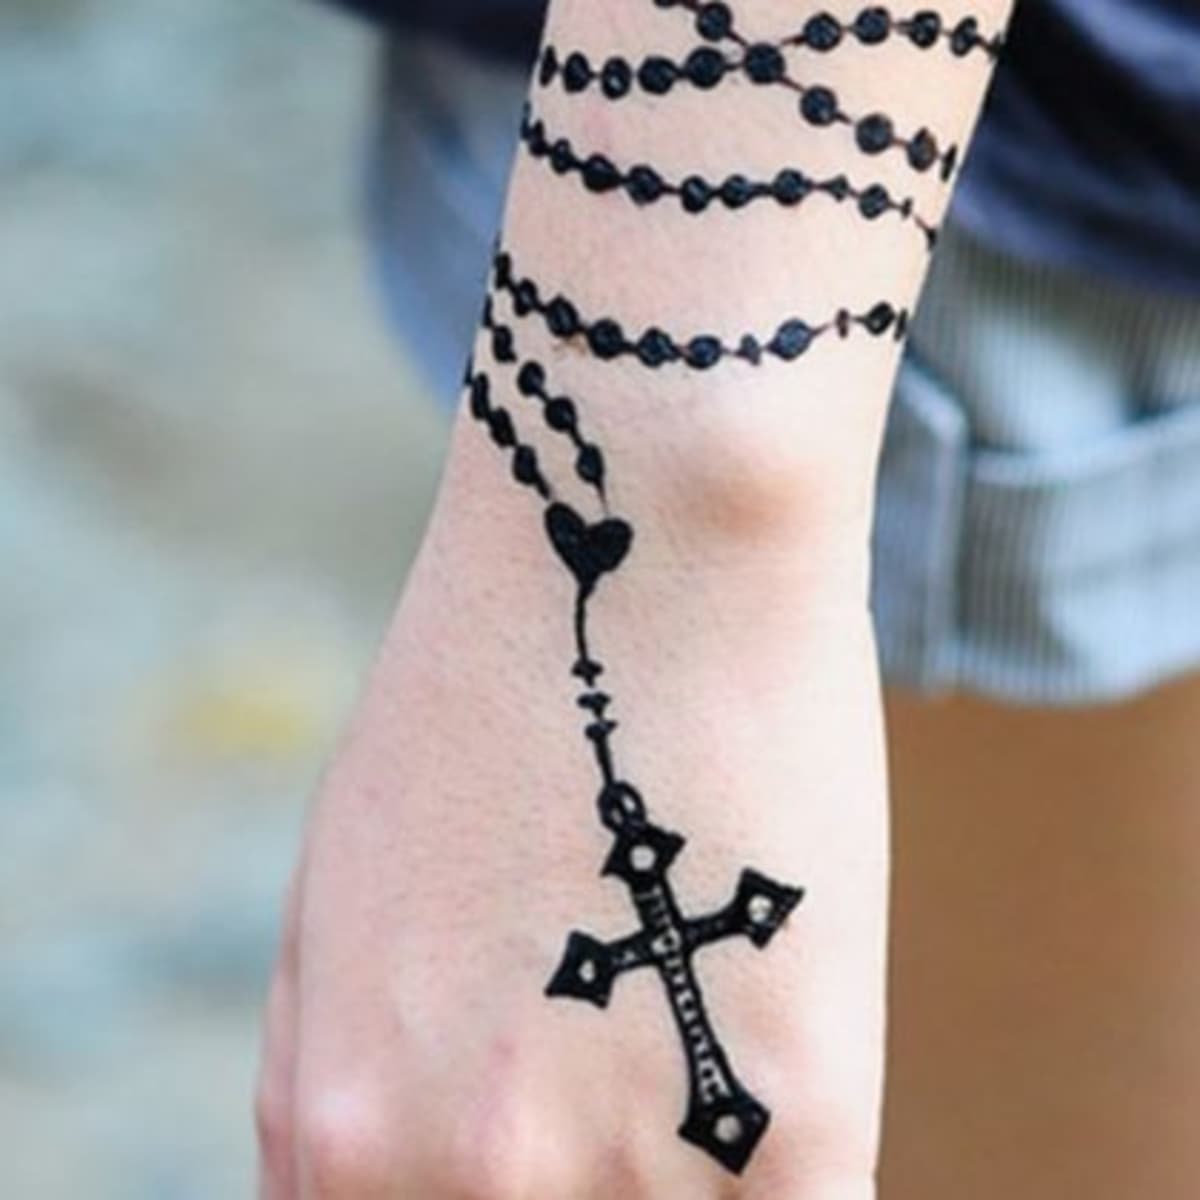 praying hands with cross and rosary tattoo